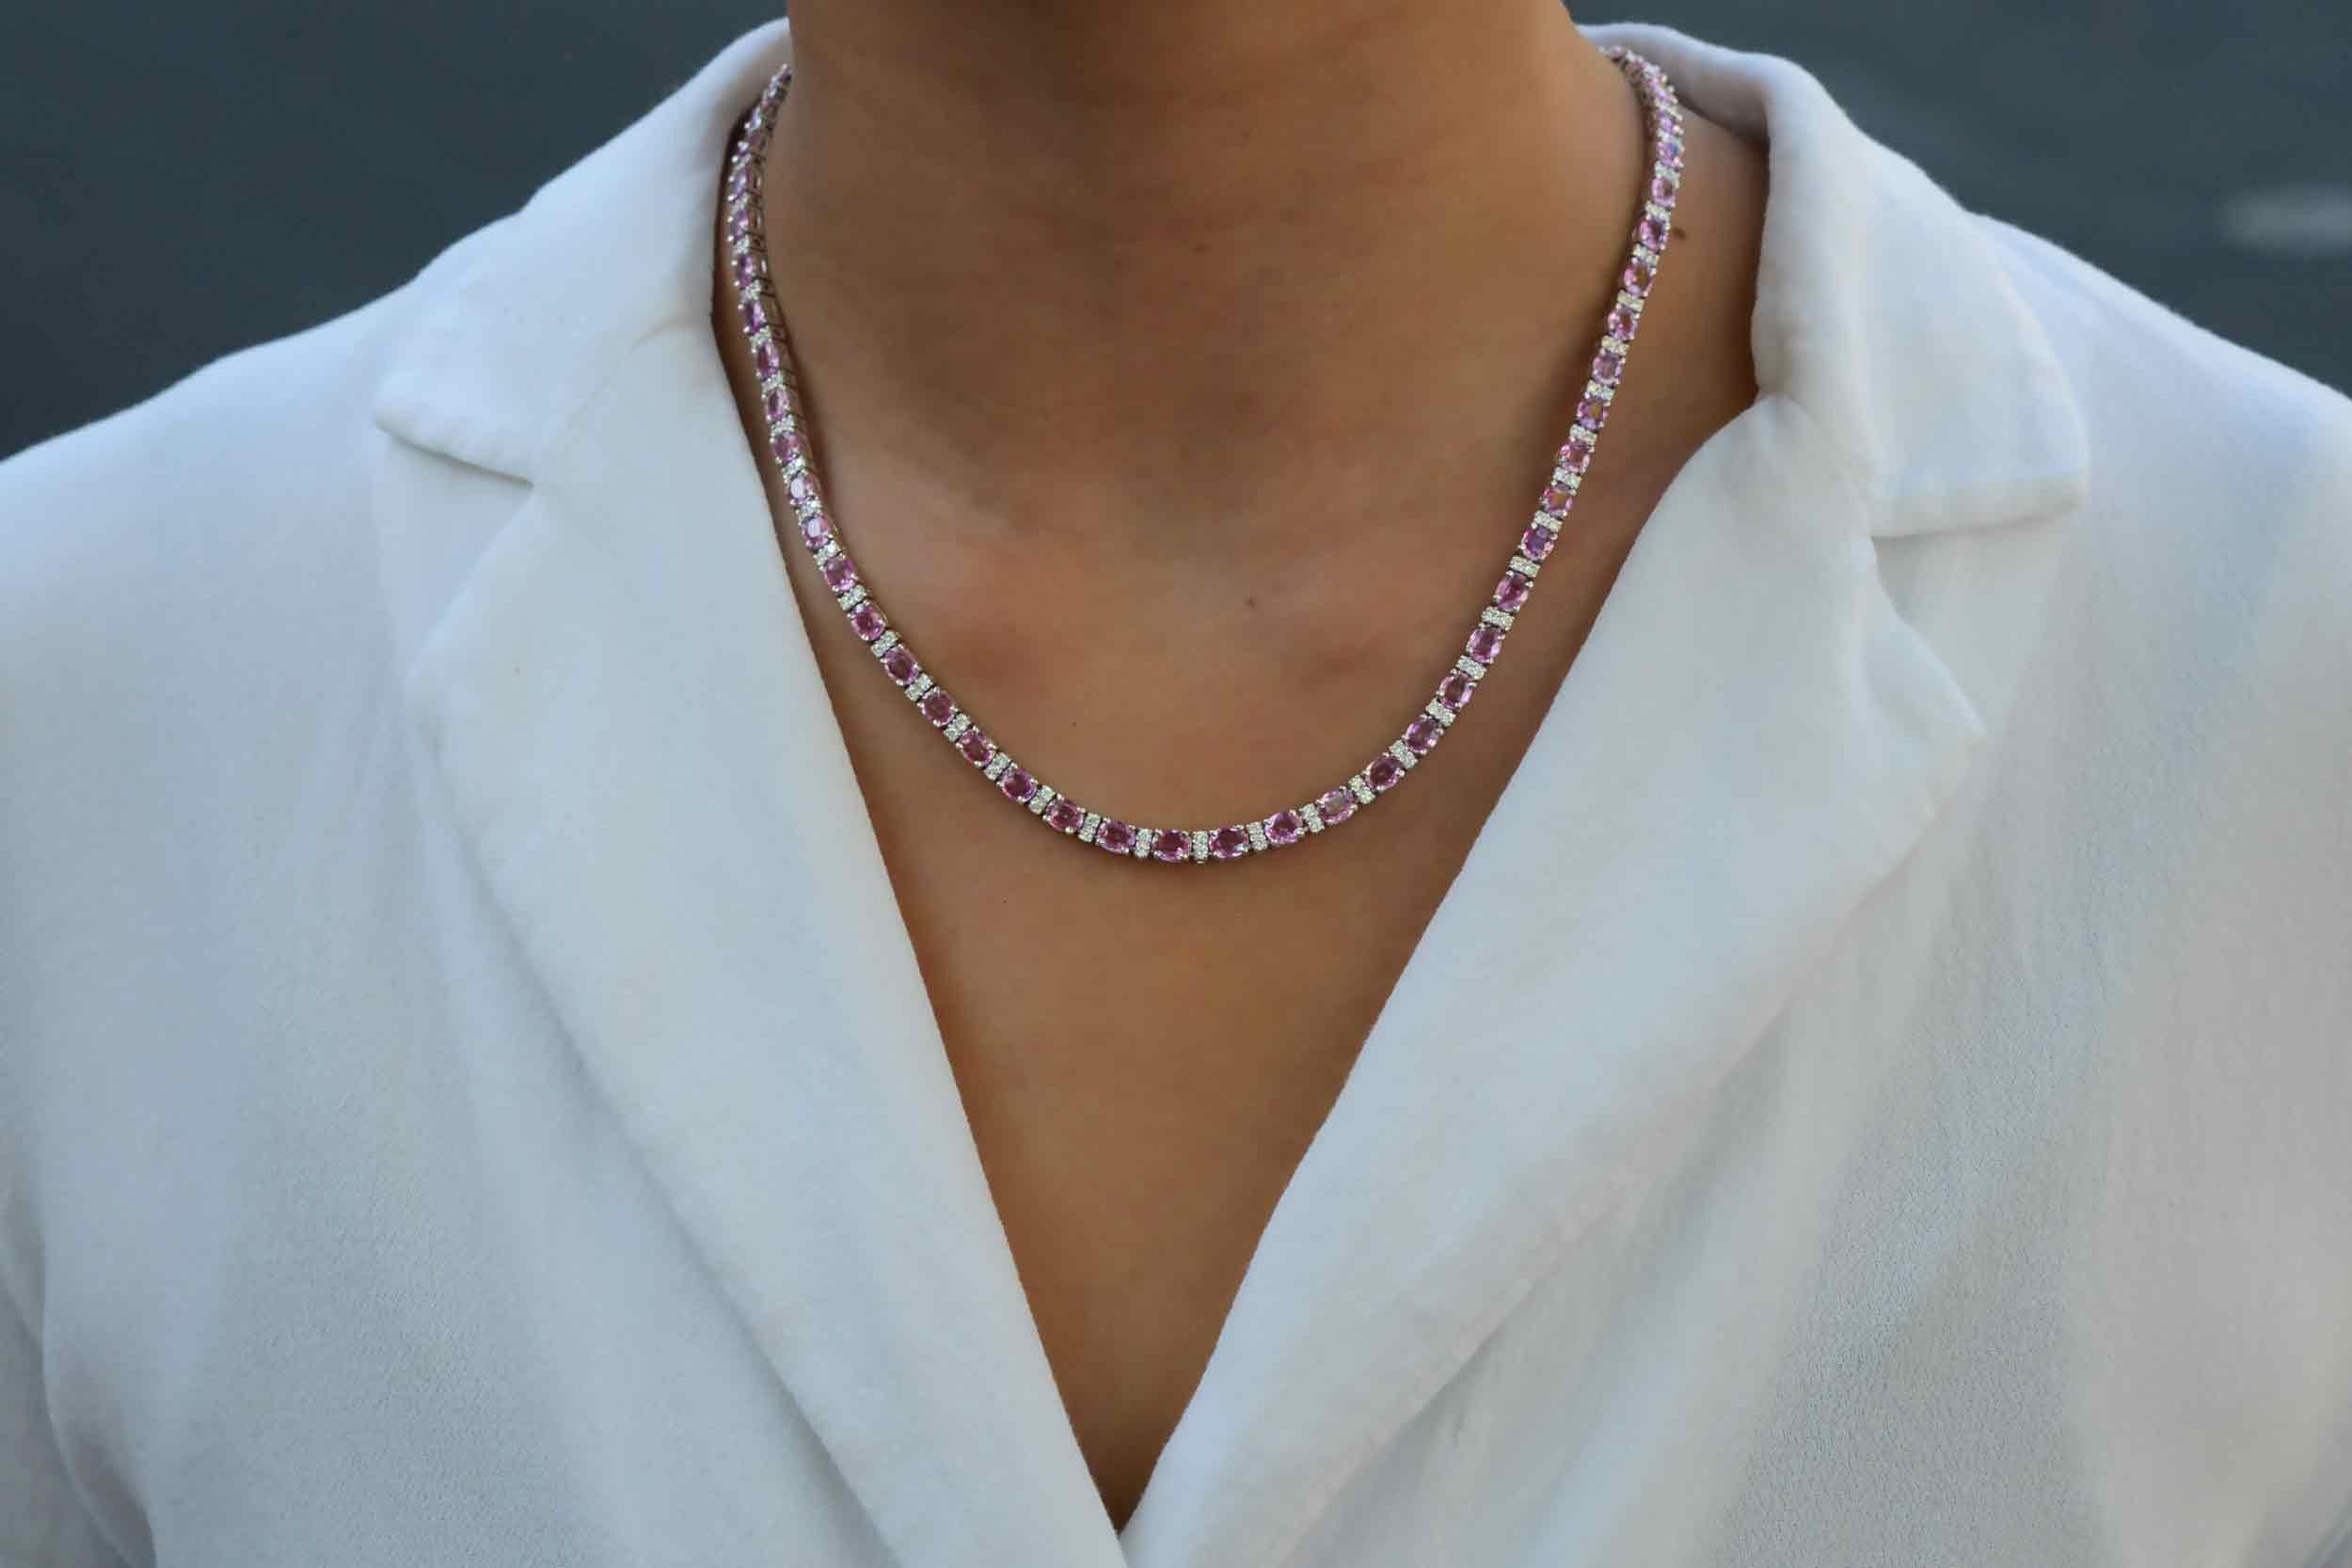 Pure elegance, this estate riviera necklace features an eternal strand of vivid-intense pink sapphires weighing a prominent 23 carats total. Integrated with stations of near colorless diamonds totaling over 1 carat, shimmering with fire and